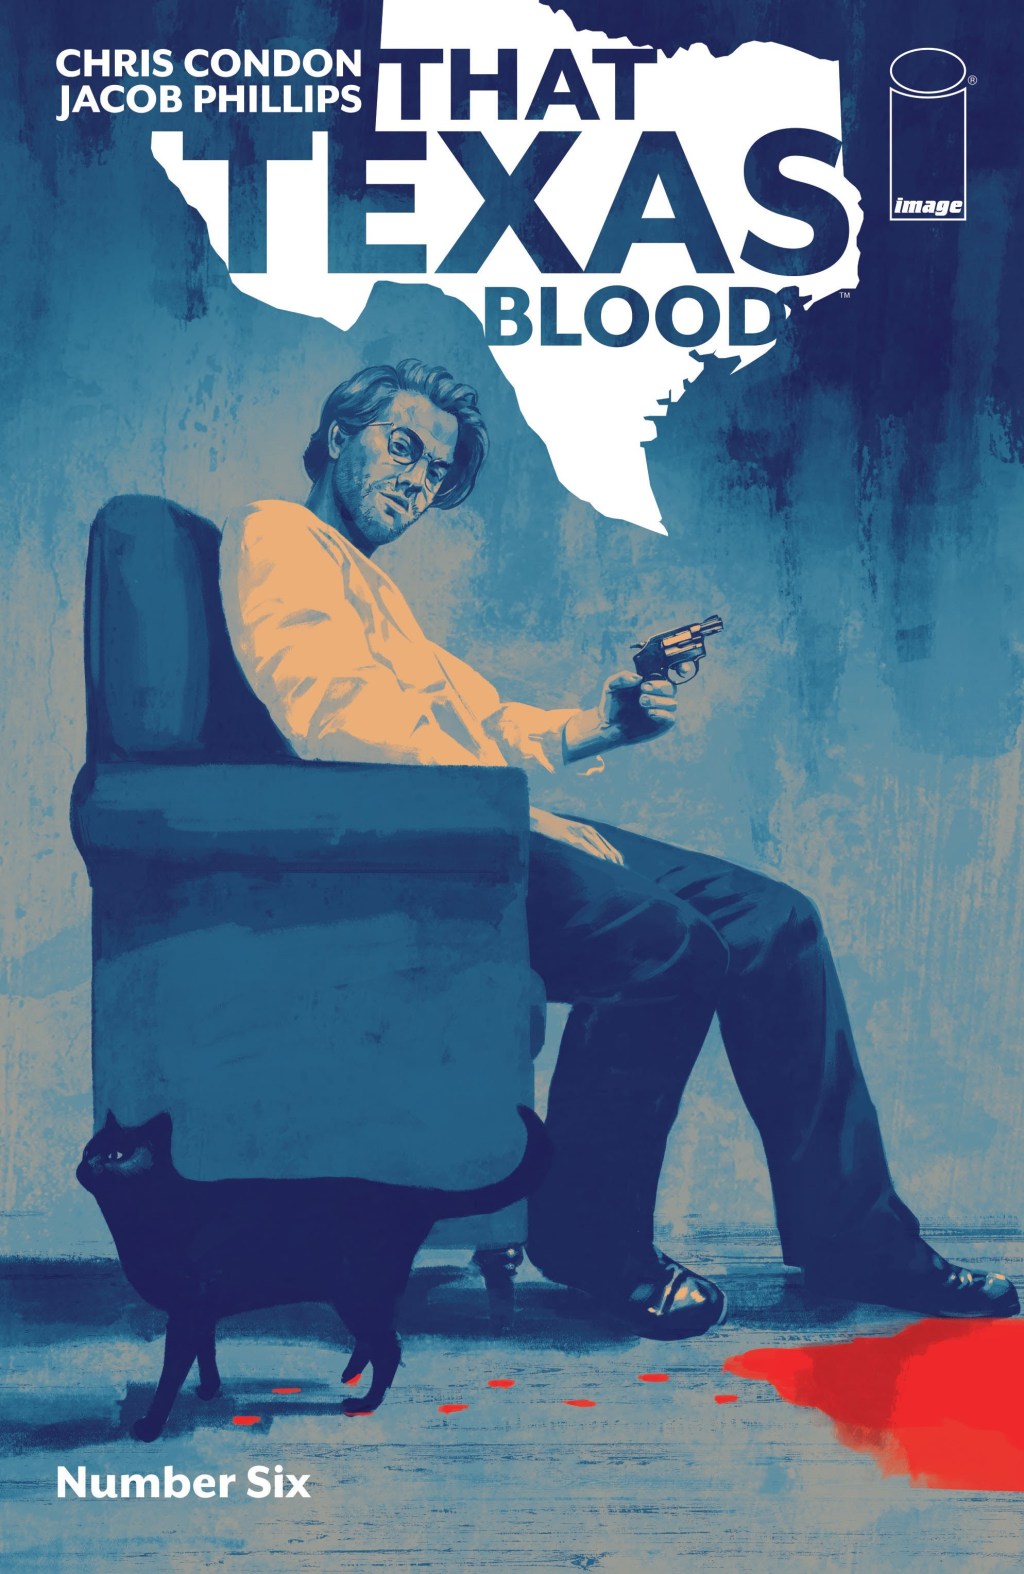 That Texas Blood Issue #6 "A Brother's Conscience, Part Five" (2020), Image Comics. Words by Chris Condon. Art by Jacob Phillips